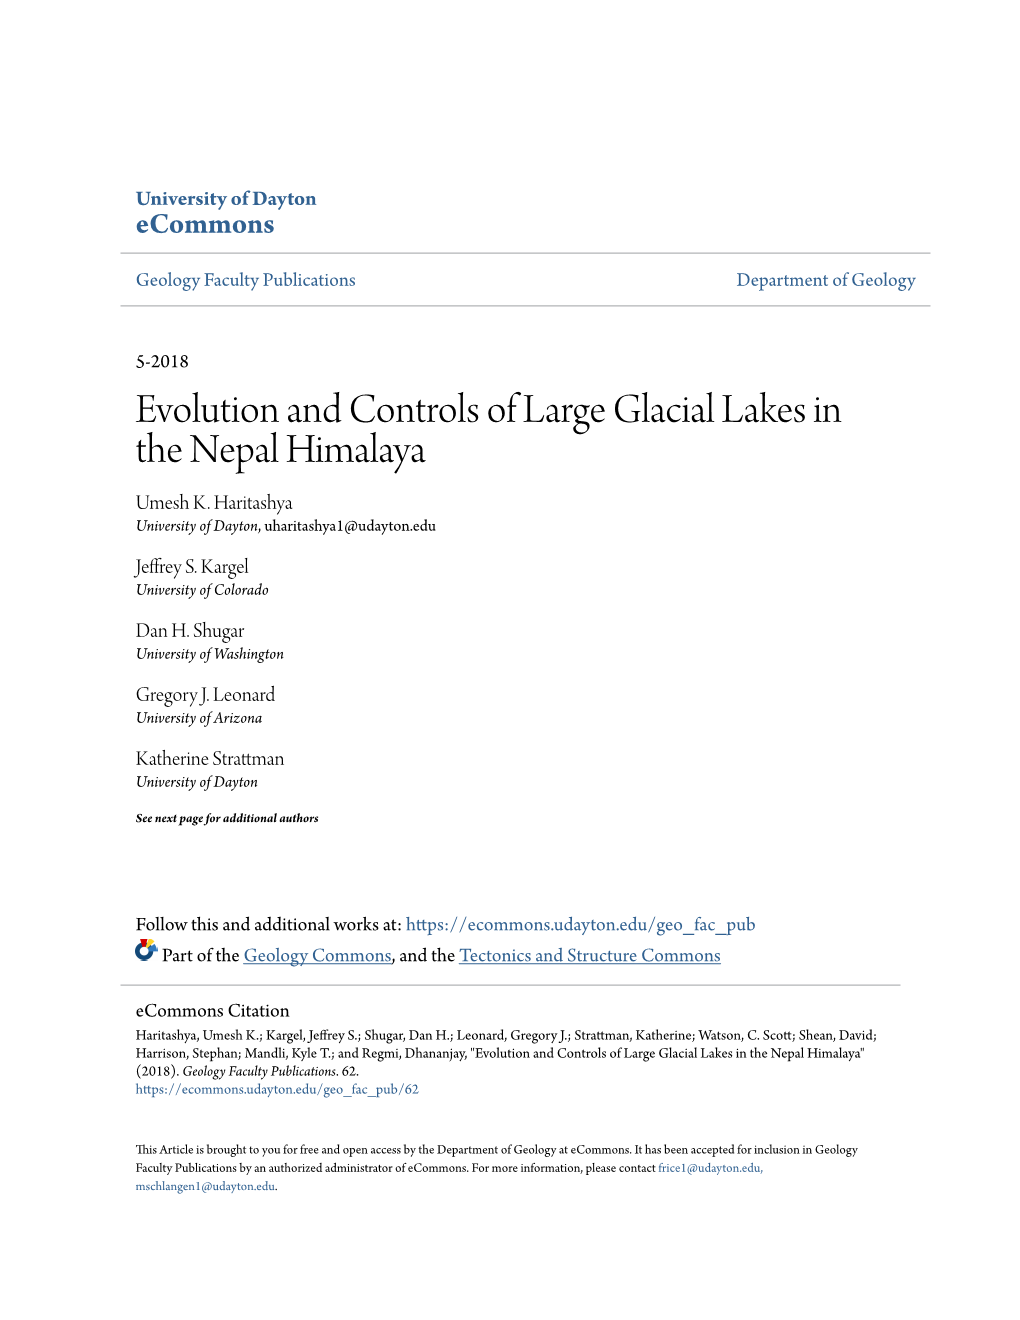 Evolution and Controls of Large Glacial Lakes in the Nepal Himalaya Umesh K